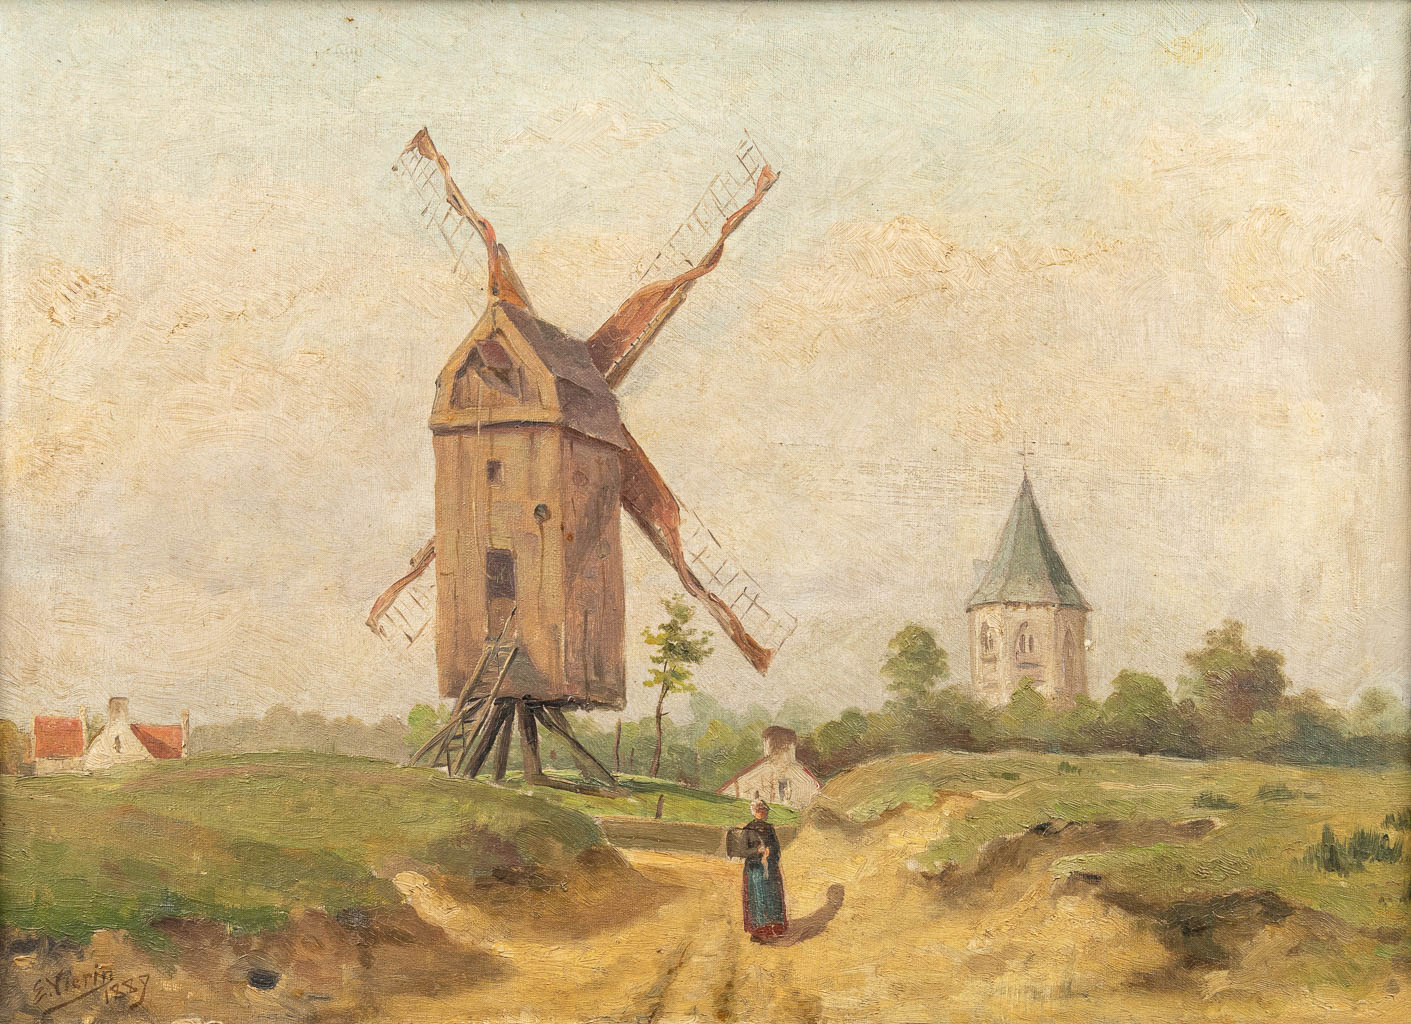 Emmanuel VIERIN (1869-1954) 'Landscape with a windmill', a painting, oil on canvas, 1889. (55 x 40 cm)